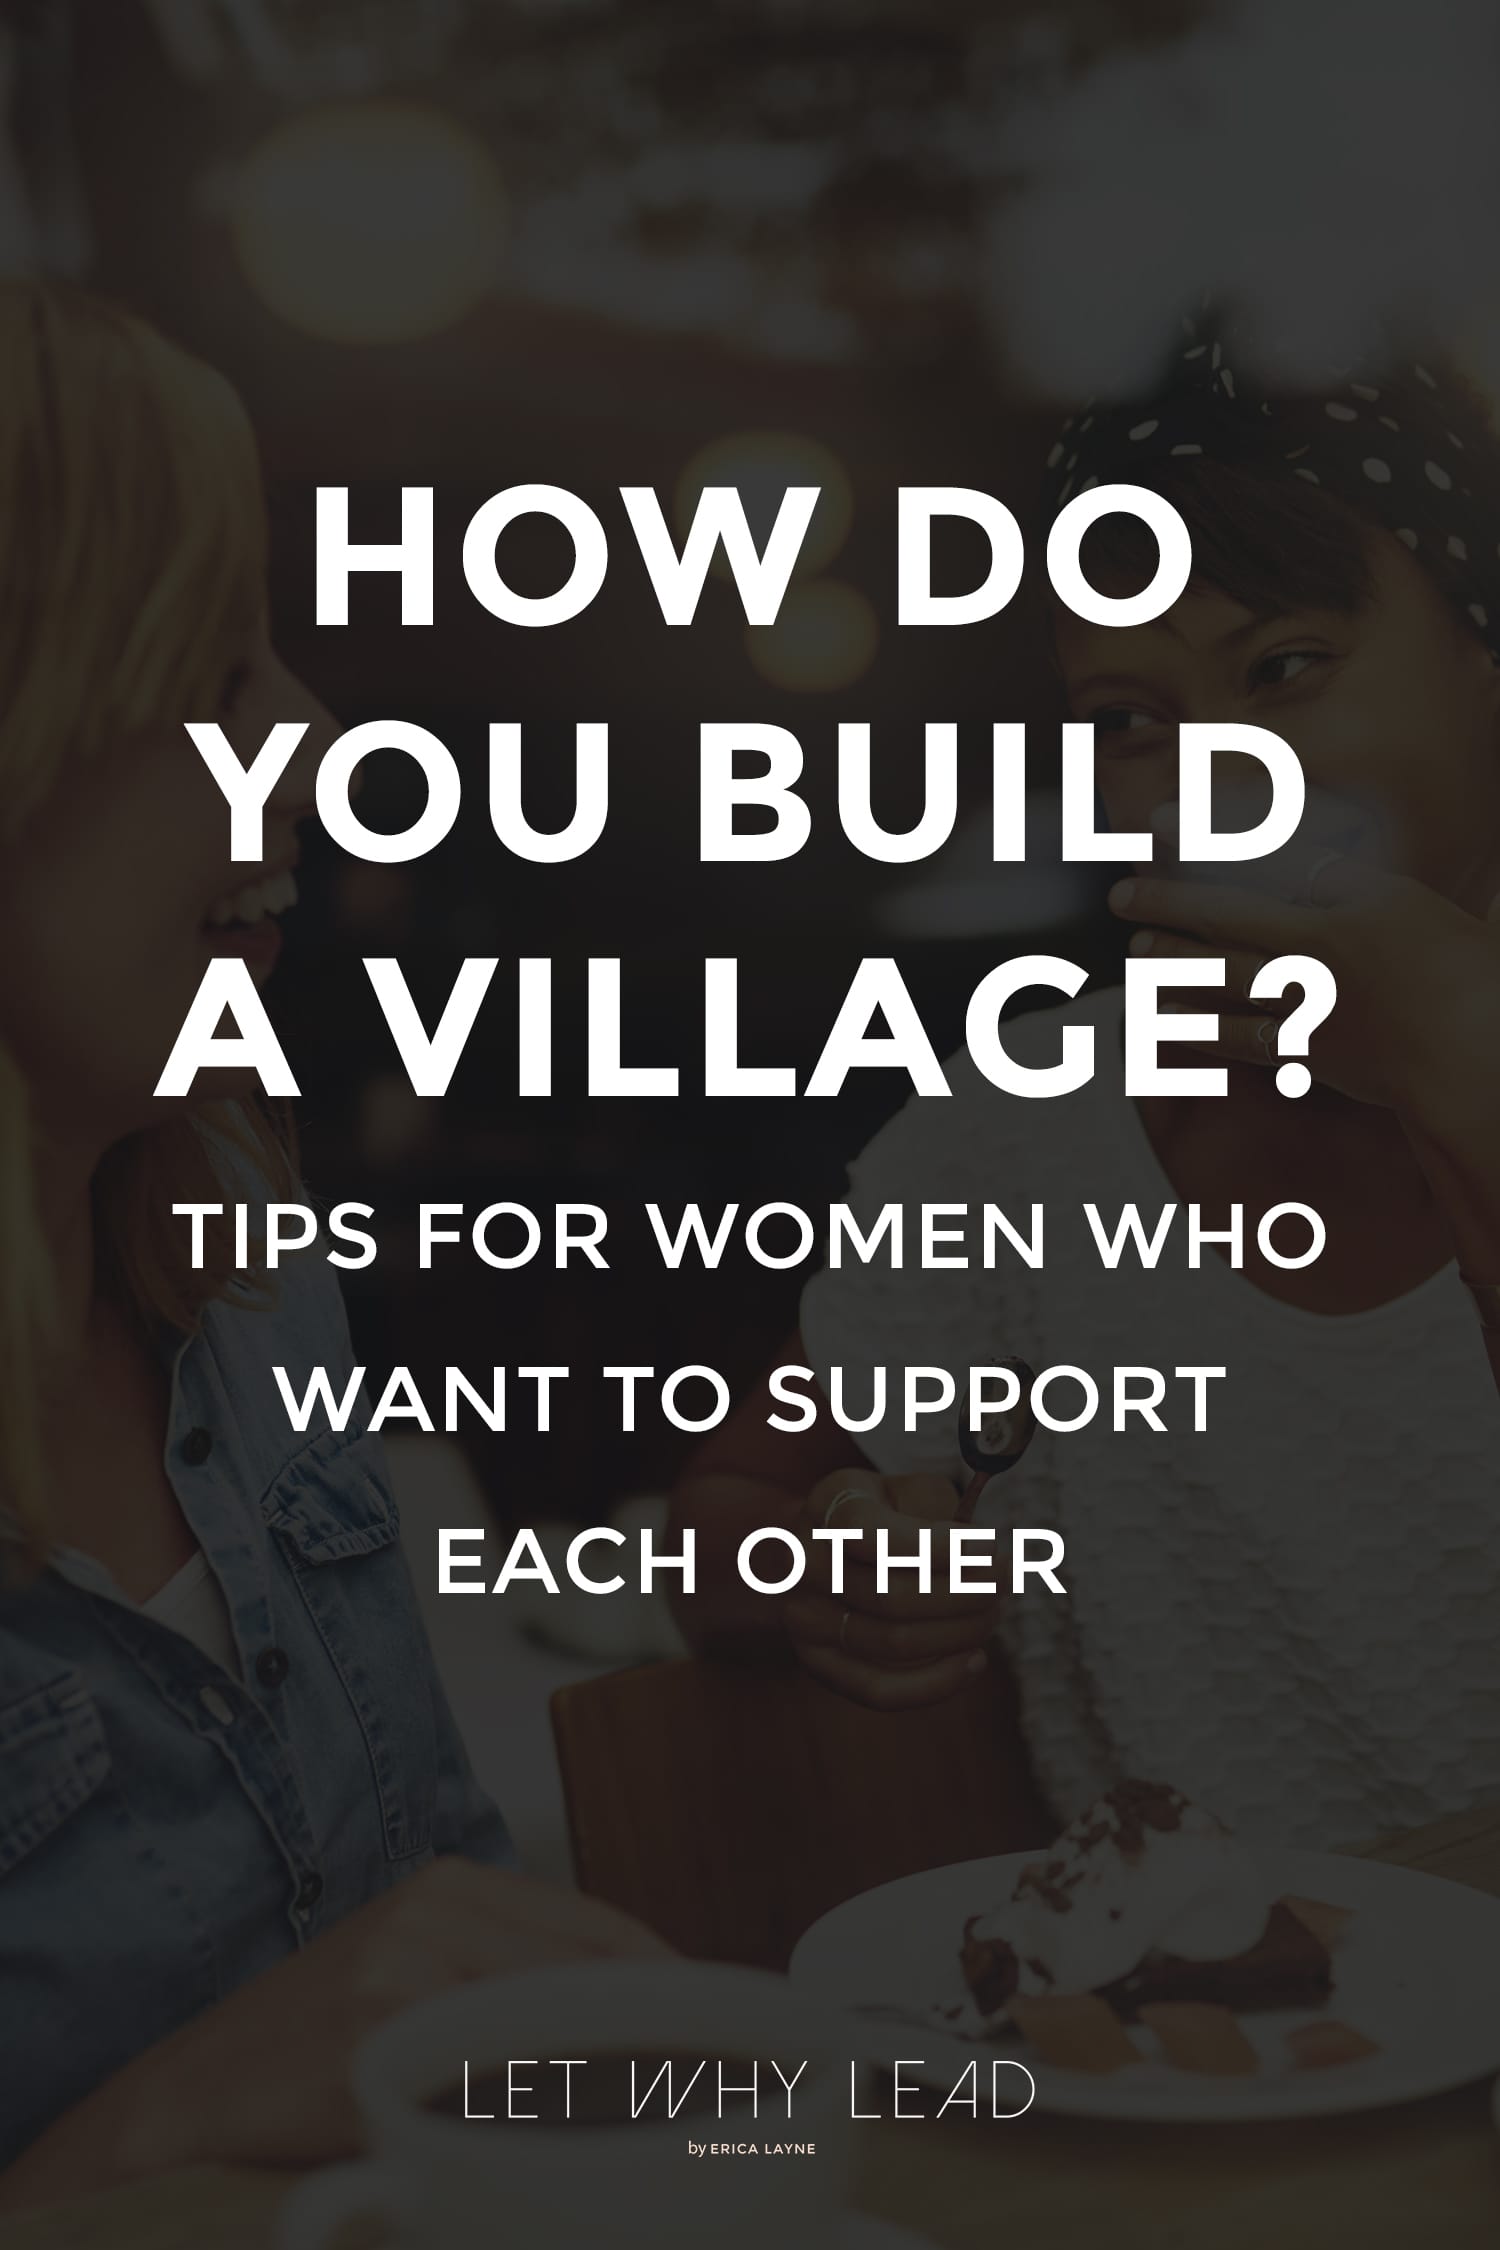 Tips for Building Your Village